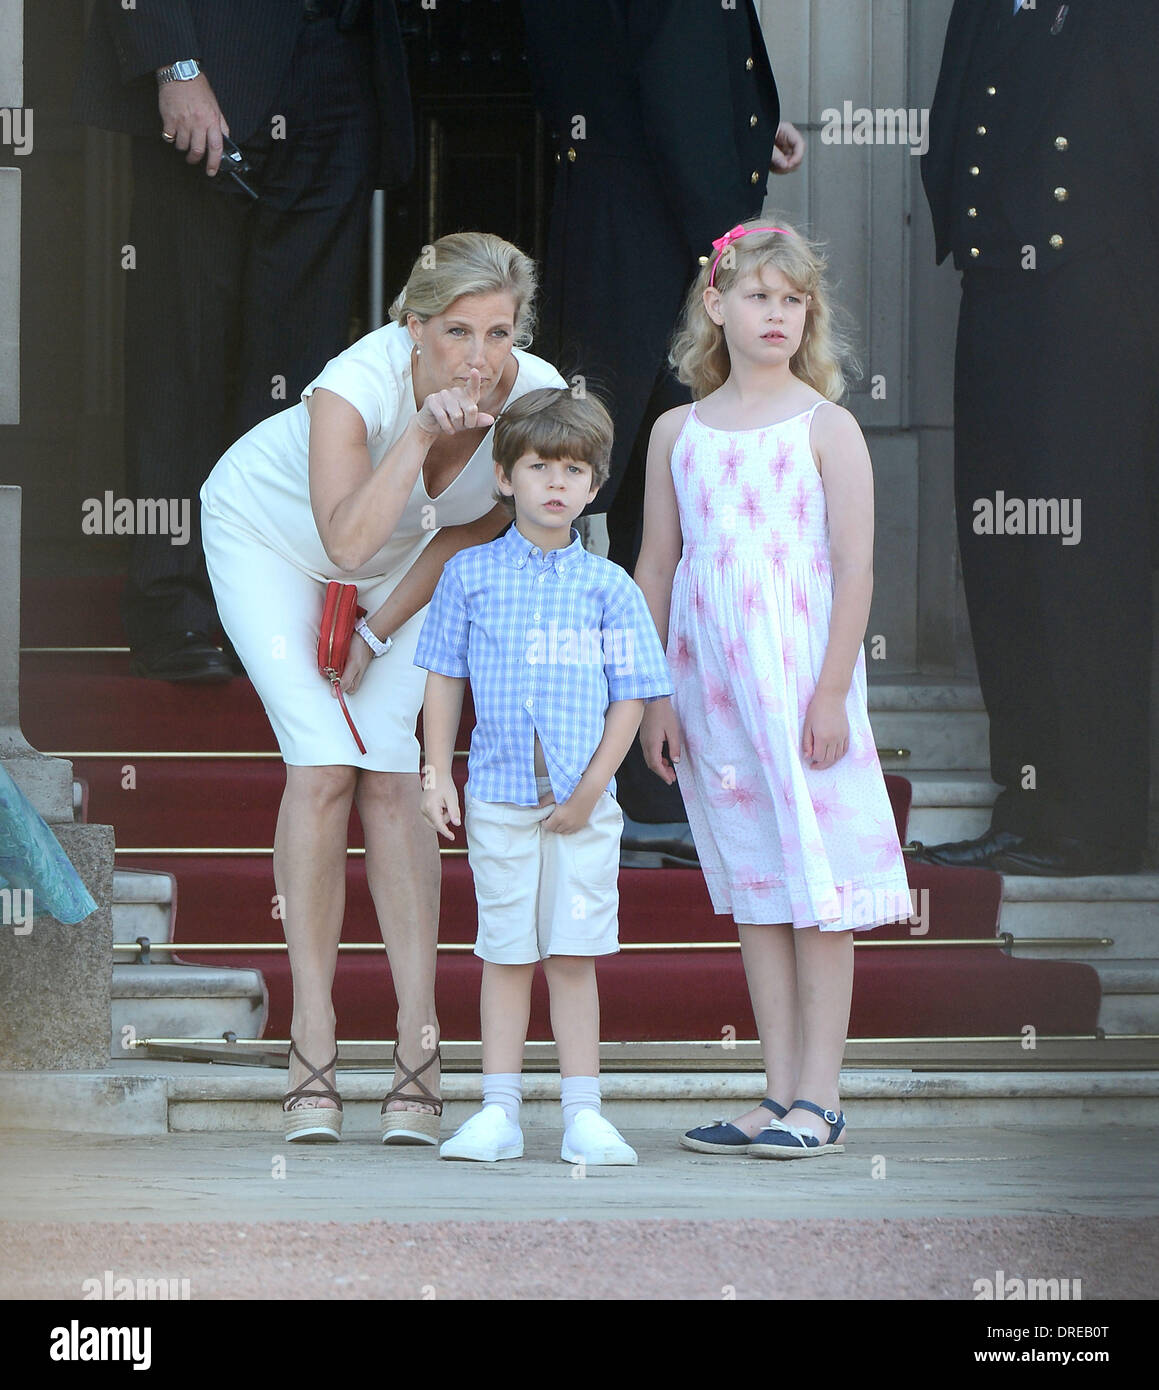 Sophie, Countess of Wessex and daughter Lady Louise Windsor wuith son James, Viscount Severn welcome the Olympic Flame to Buckingham Palace during the Olympic Torch Relay London, England - 26.07.12 Stock Photo